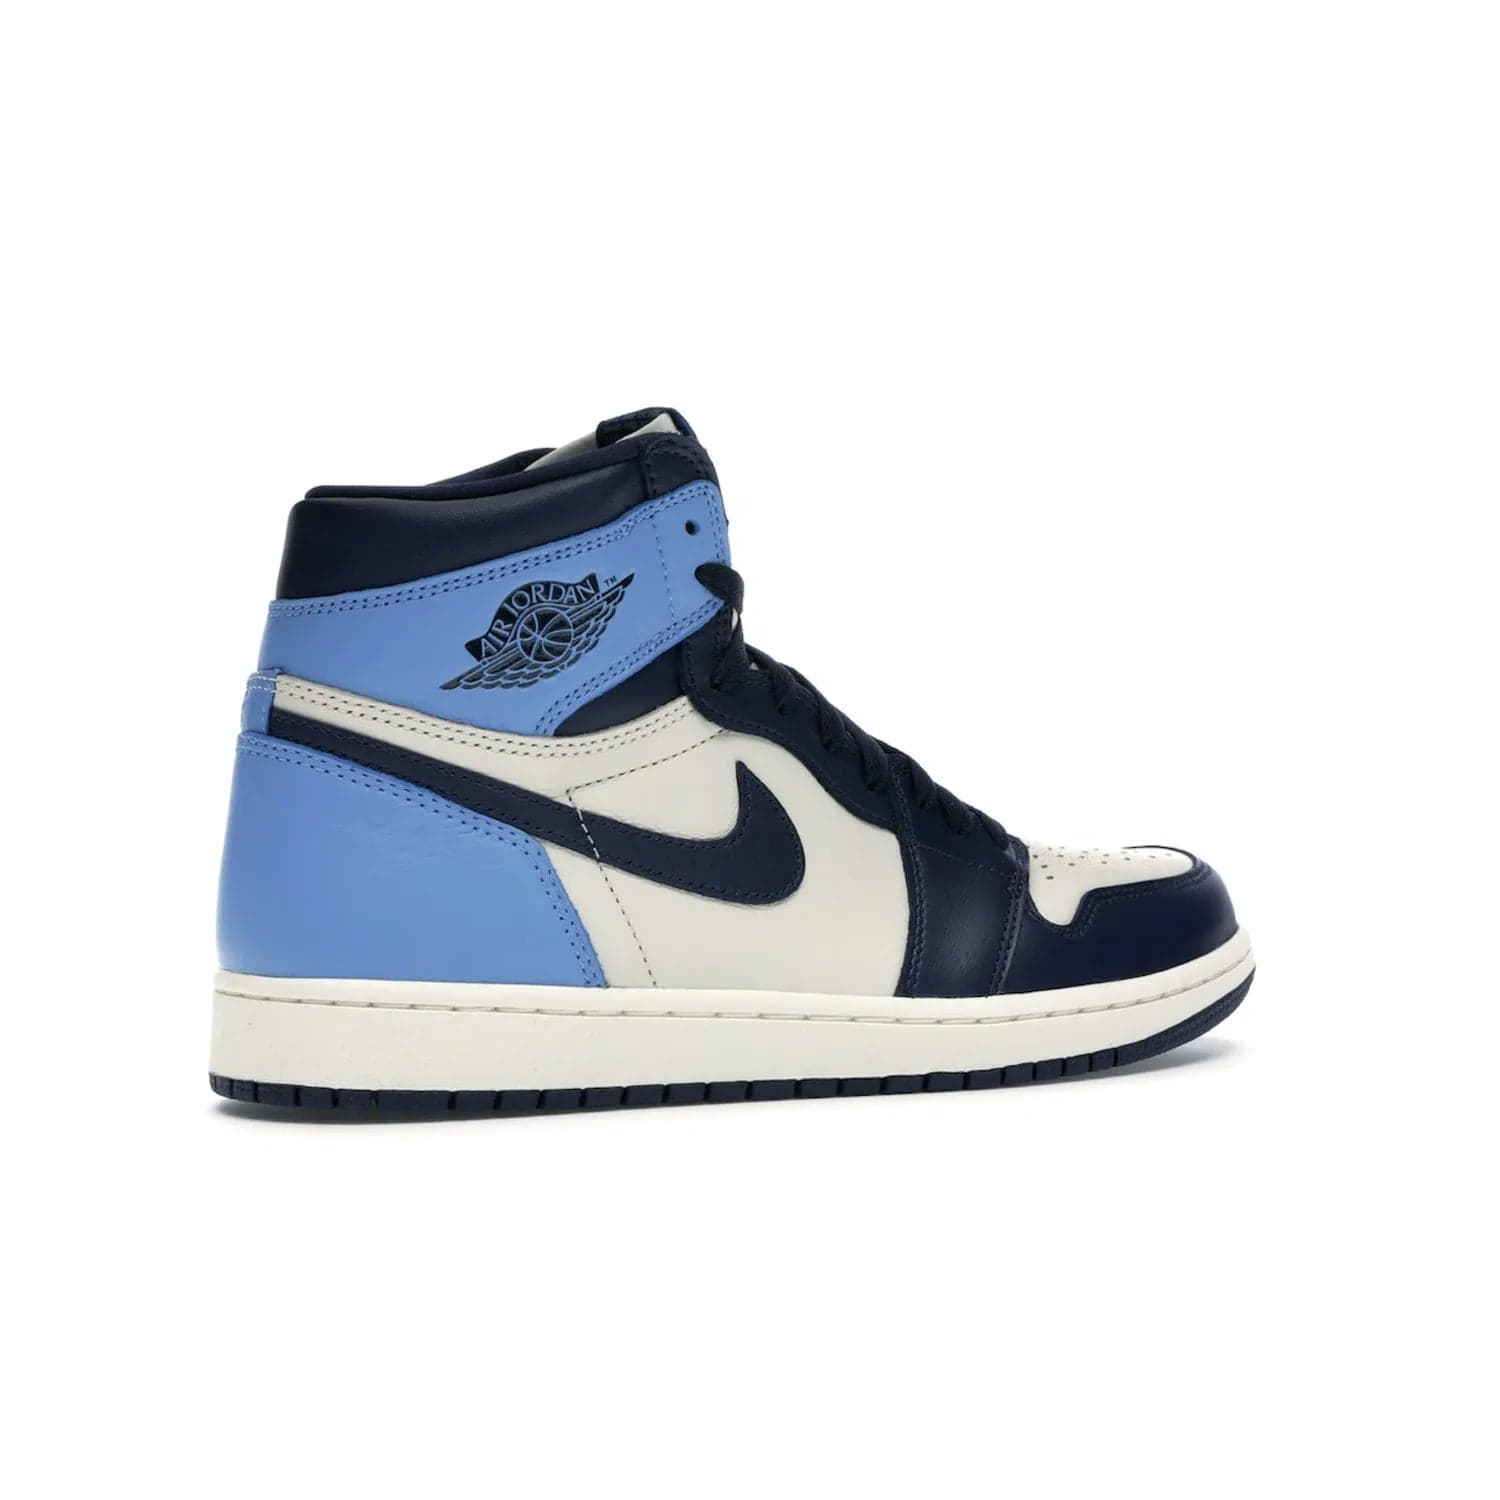 Jordan 1 Retro High Obsidian UNC - Image 34 - Only at www.BallersClubKickz.com - Bring a timeless classic to your wardrobe with the Air Jordan 1 Retro High "Obsidian/University Blue”. A full leather upper combines Obsidian and University Blue detailing for a retro Jordan style. Stitched Jumpman logo pays tribute to UNC. Experience classic style with a timeless sneaker.